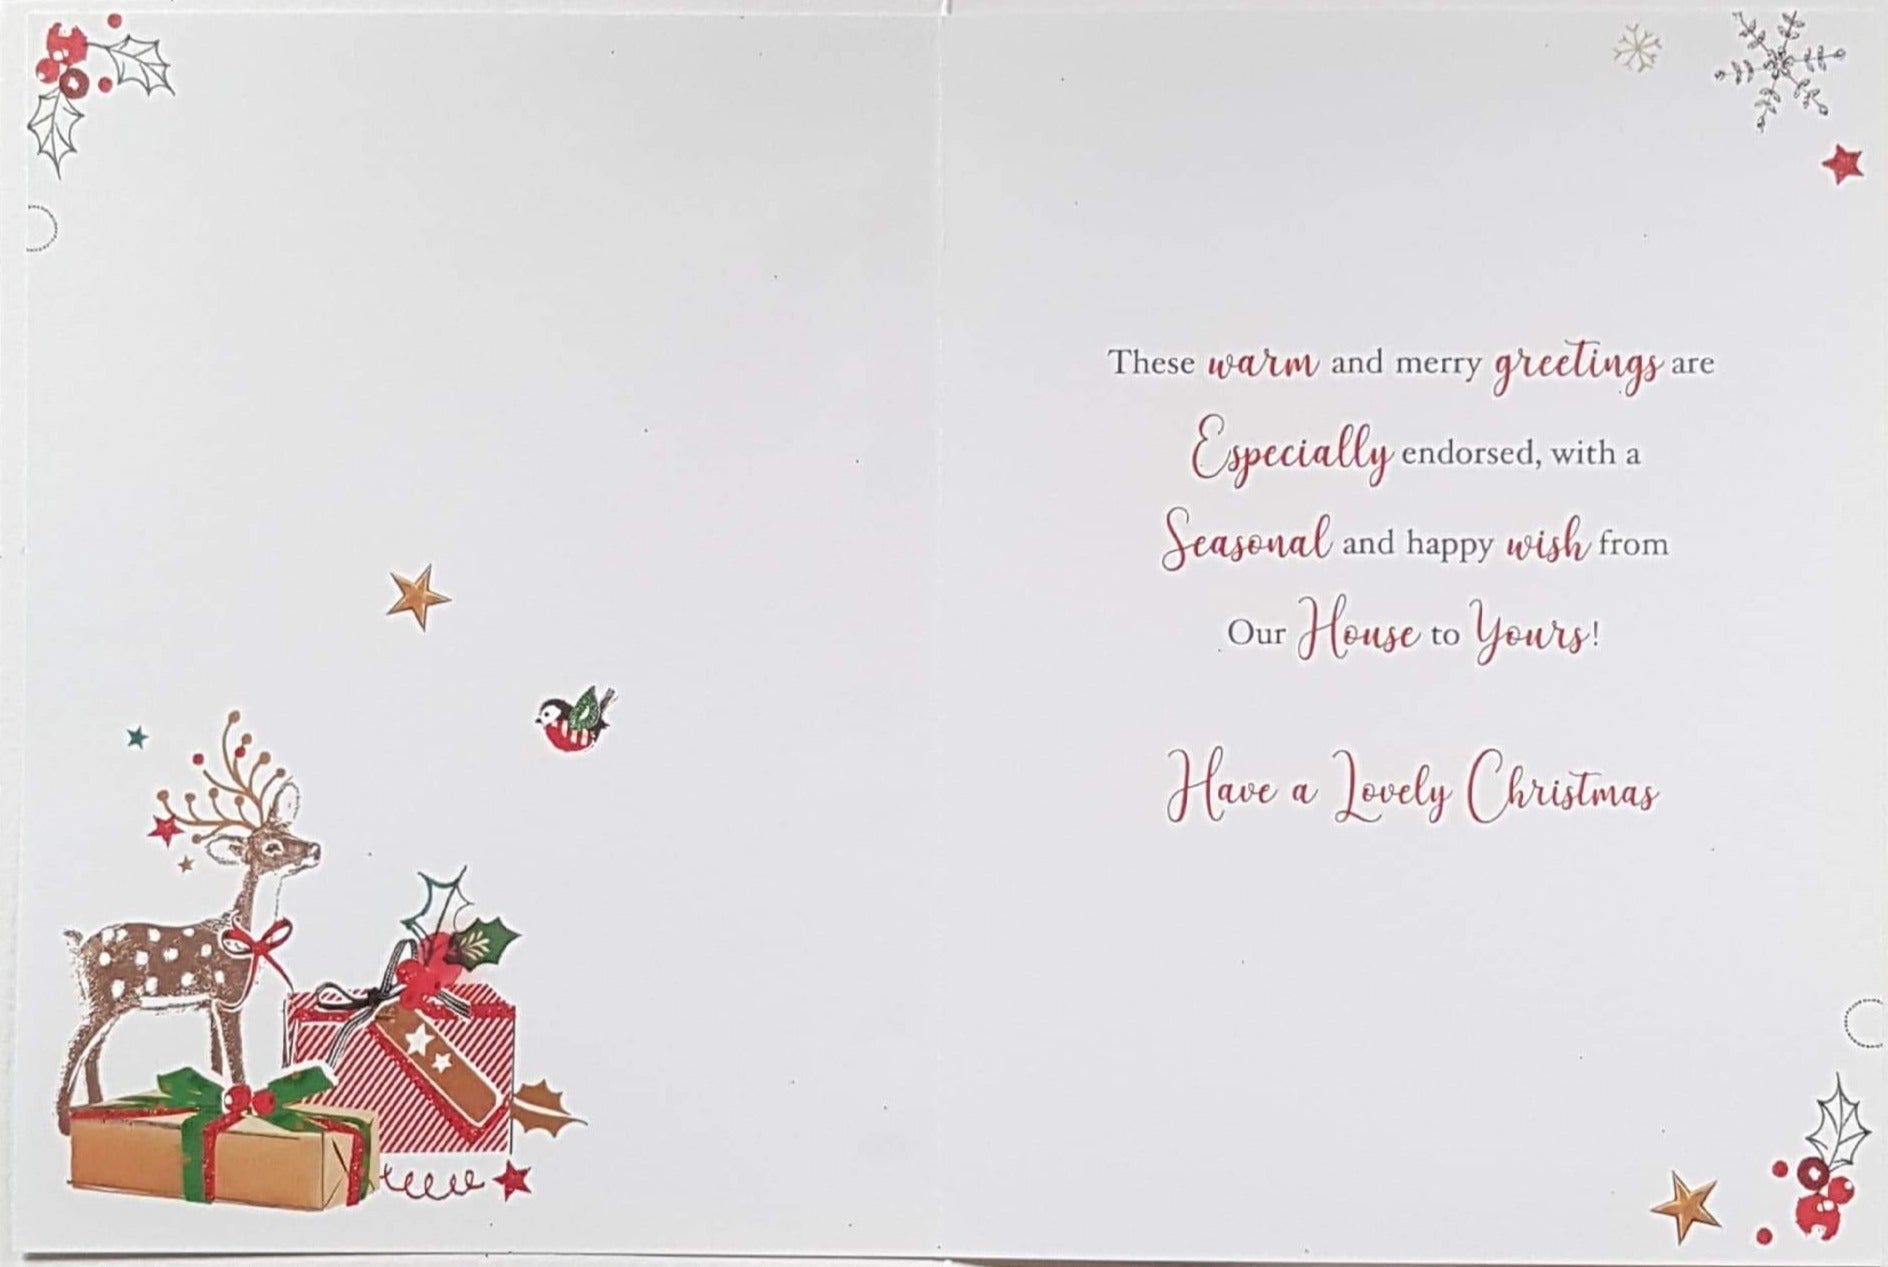 Our House To Your House Christmas Card - Have A Lovely Christmas & A Reindeer & Decorated Tree